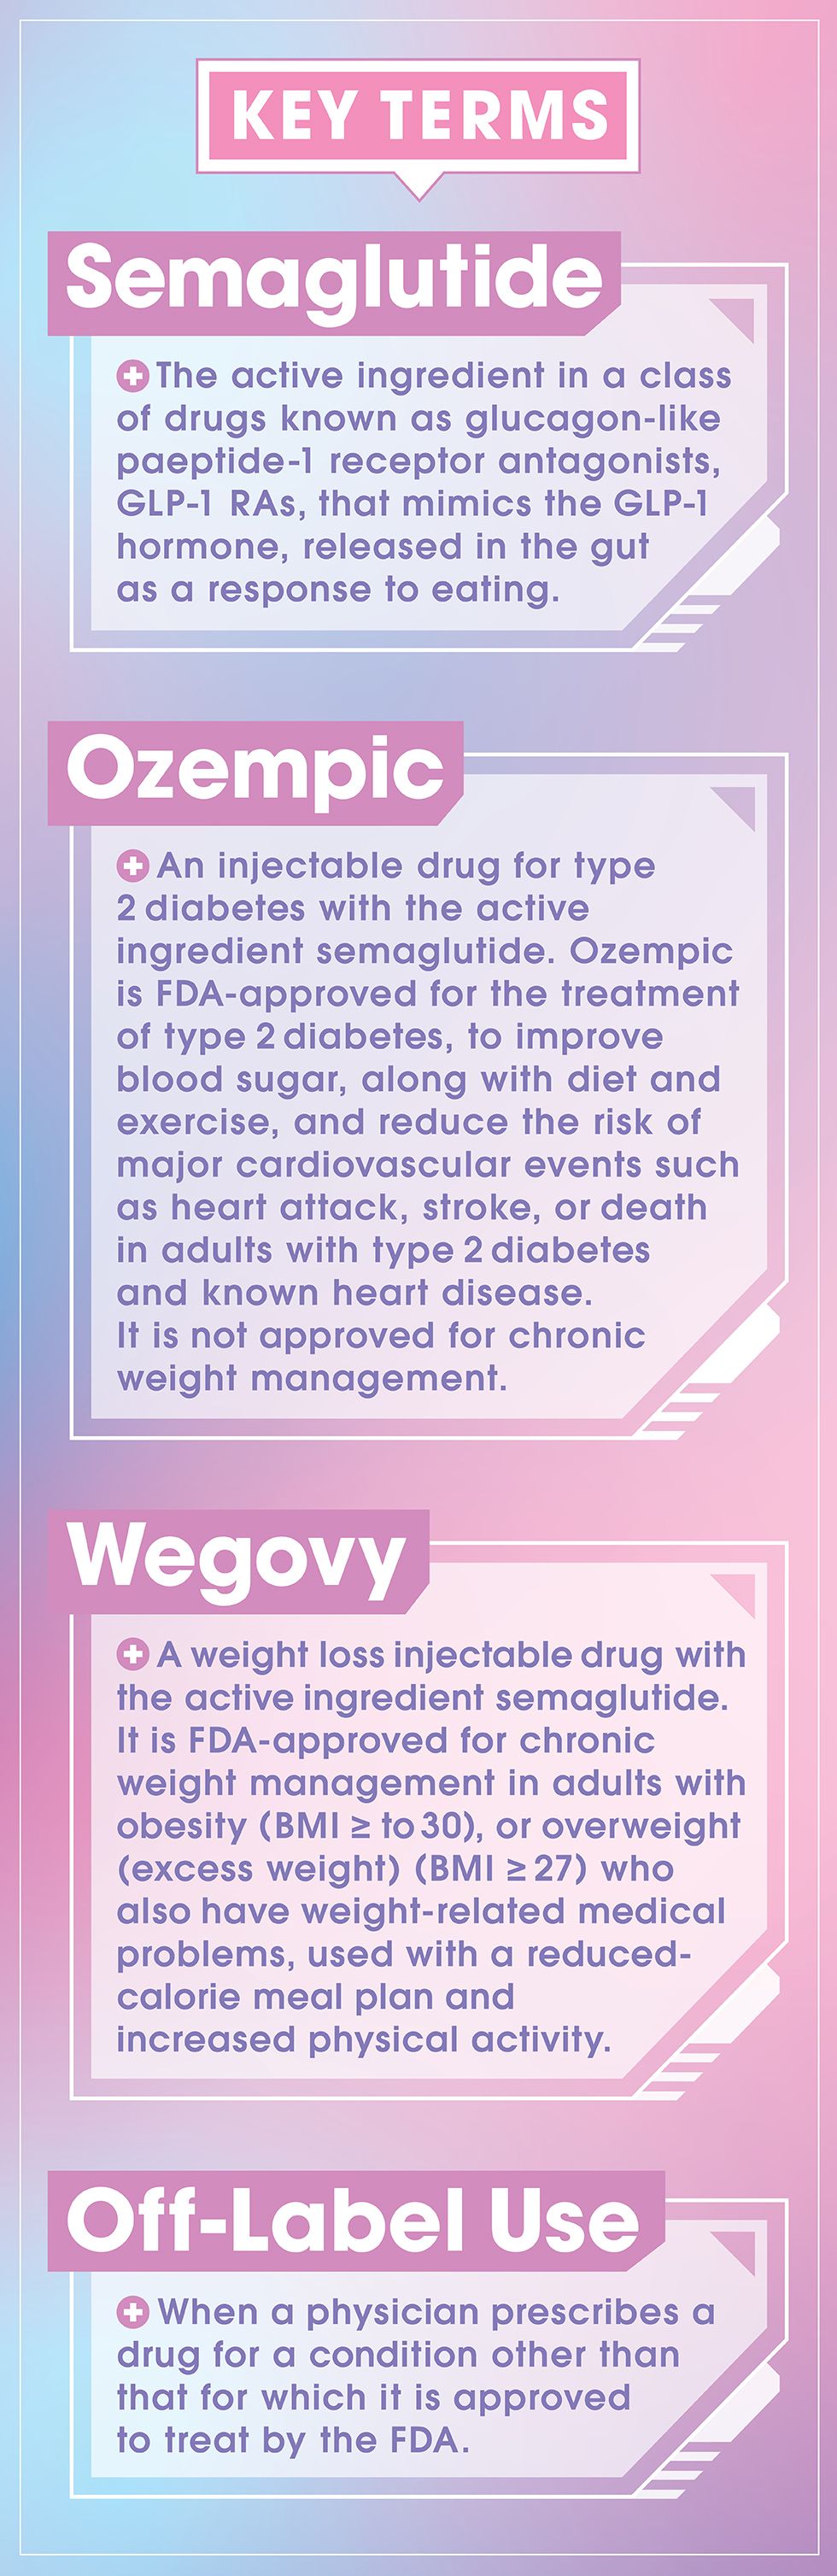 key terms list semaglutide, the active ingredient in a class of drugs known as glucagon like paeptide 1 receptor antagonists ozempic, an injectable drug for type 2 diabetes with the active ingredient semaglutide wegovy, a weight loss injectable drug with the active ingredient semaglutide off label use, or when a physician prescribes a drug for a condition other than that for which it is approved to treat by the fda